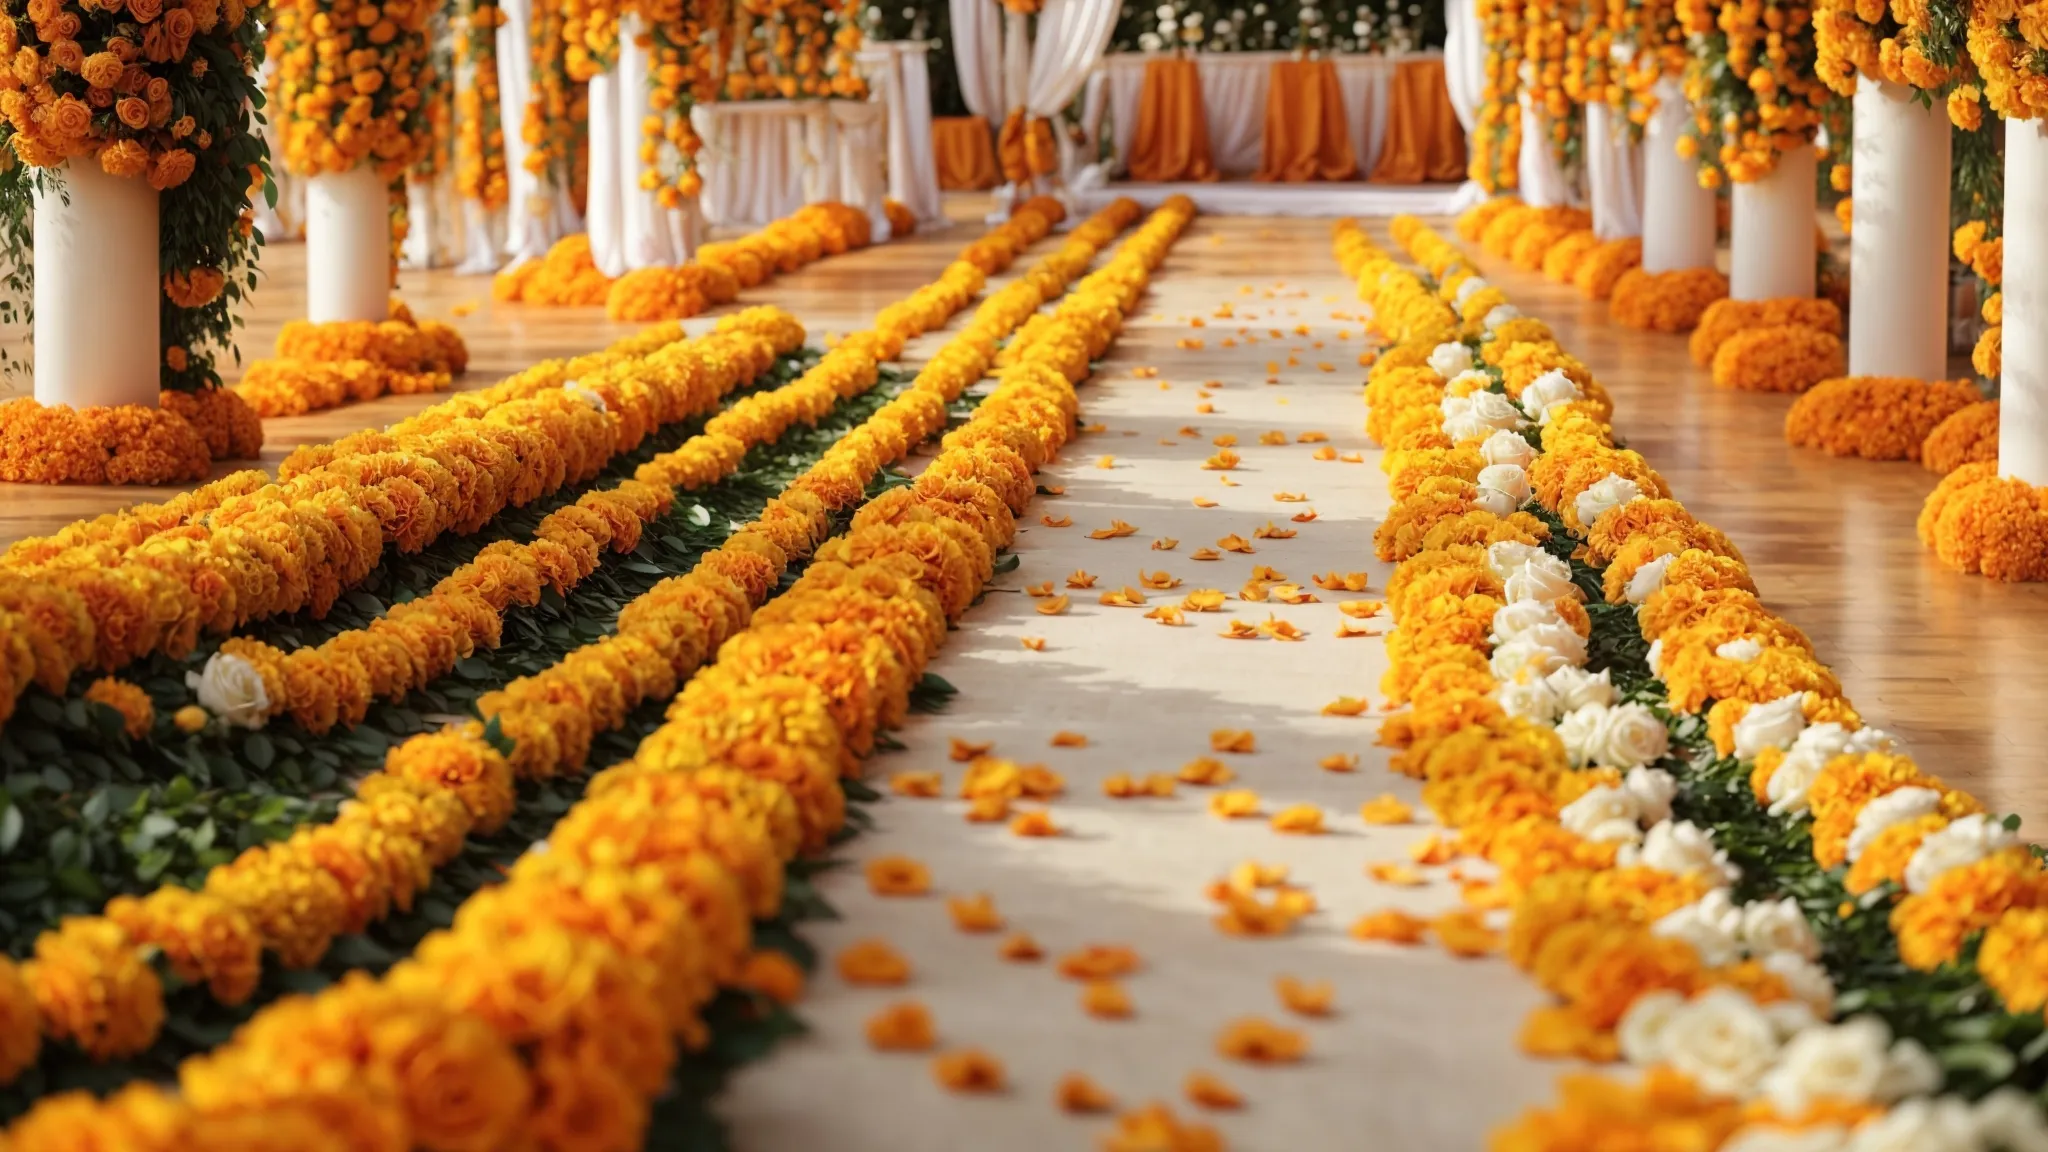 a vibrant mix of marigold garlands and white roses adorning an elegantly set wedding aisle, bridging indian vibrancy with western elegance.